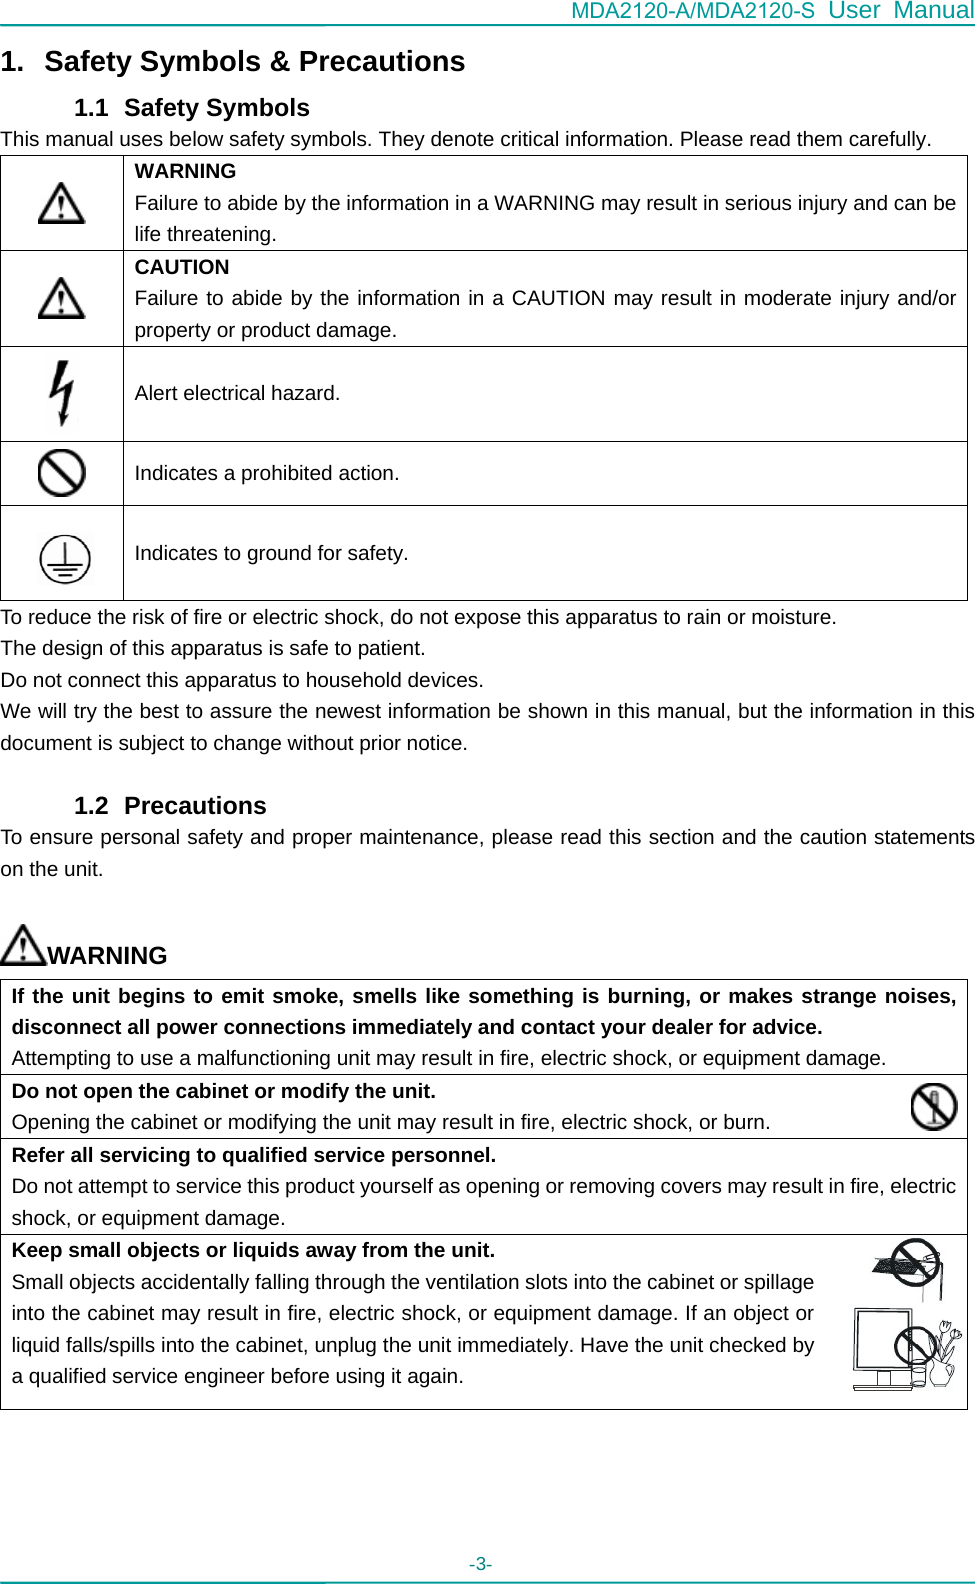 MDA2120-A/MDA2120-S User Manual - 3-   1.  Safety Symbols &amp; Precautions 1.1   Safety Symbols This manual uses below safety symbols. They denote critical information. Please read them carefully.  WARNING Failure to abide by the information in a WARNING may result in serious injury and can be life threatening.  CAUTION Failure to abide by the information in a CAUTION may result in moderate injury and/or property or product damage.  Alert electrical hazard.  Indicates a prohibited action.   Indicates to ground for safety. To reduce the risk of fire or electric shock, do not expose this apparatus to rain or moisture. The design of this apparatus is safe to patient. Do not connect this apparatus to household devices. We will try the best to assure the newest information be shown in this manual, but the information in this document is subject to change without prior notice.  1.2   Precautions To ensure personal safety and proper maintenance, please read this section and the caution statements on the unit.  WARNING If the unit begins to emit smoke, smells like something is burning, or makes strange noises, disconnect all power connections immediately and contact your dealer for advice. Attempting to use a malfunctioning unit may result in fire, electric shock, or equipment damage. Do not open the cabinet or modify the unit. Opening the cabinet or modifying the unit may result in fire, electric shock, or burn. Refer all servicing to qualified service personnel. Do not attempt to service this product yourself as opening or removing covers may result in fire, electric shock, or equipment damage. Keep small objects or liquids away from the unit. Small objects accidentally falling through the ventilation slots into the cabinet or spillage into the cabinet may result in fire, electric shock, or equipment damage. If an object or liquid falls/spills into the cabinet, unplug the unit immediately. Have the unit checked by a qualified service engineer before using it again. 